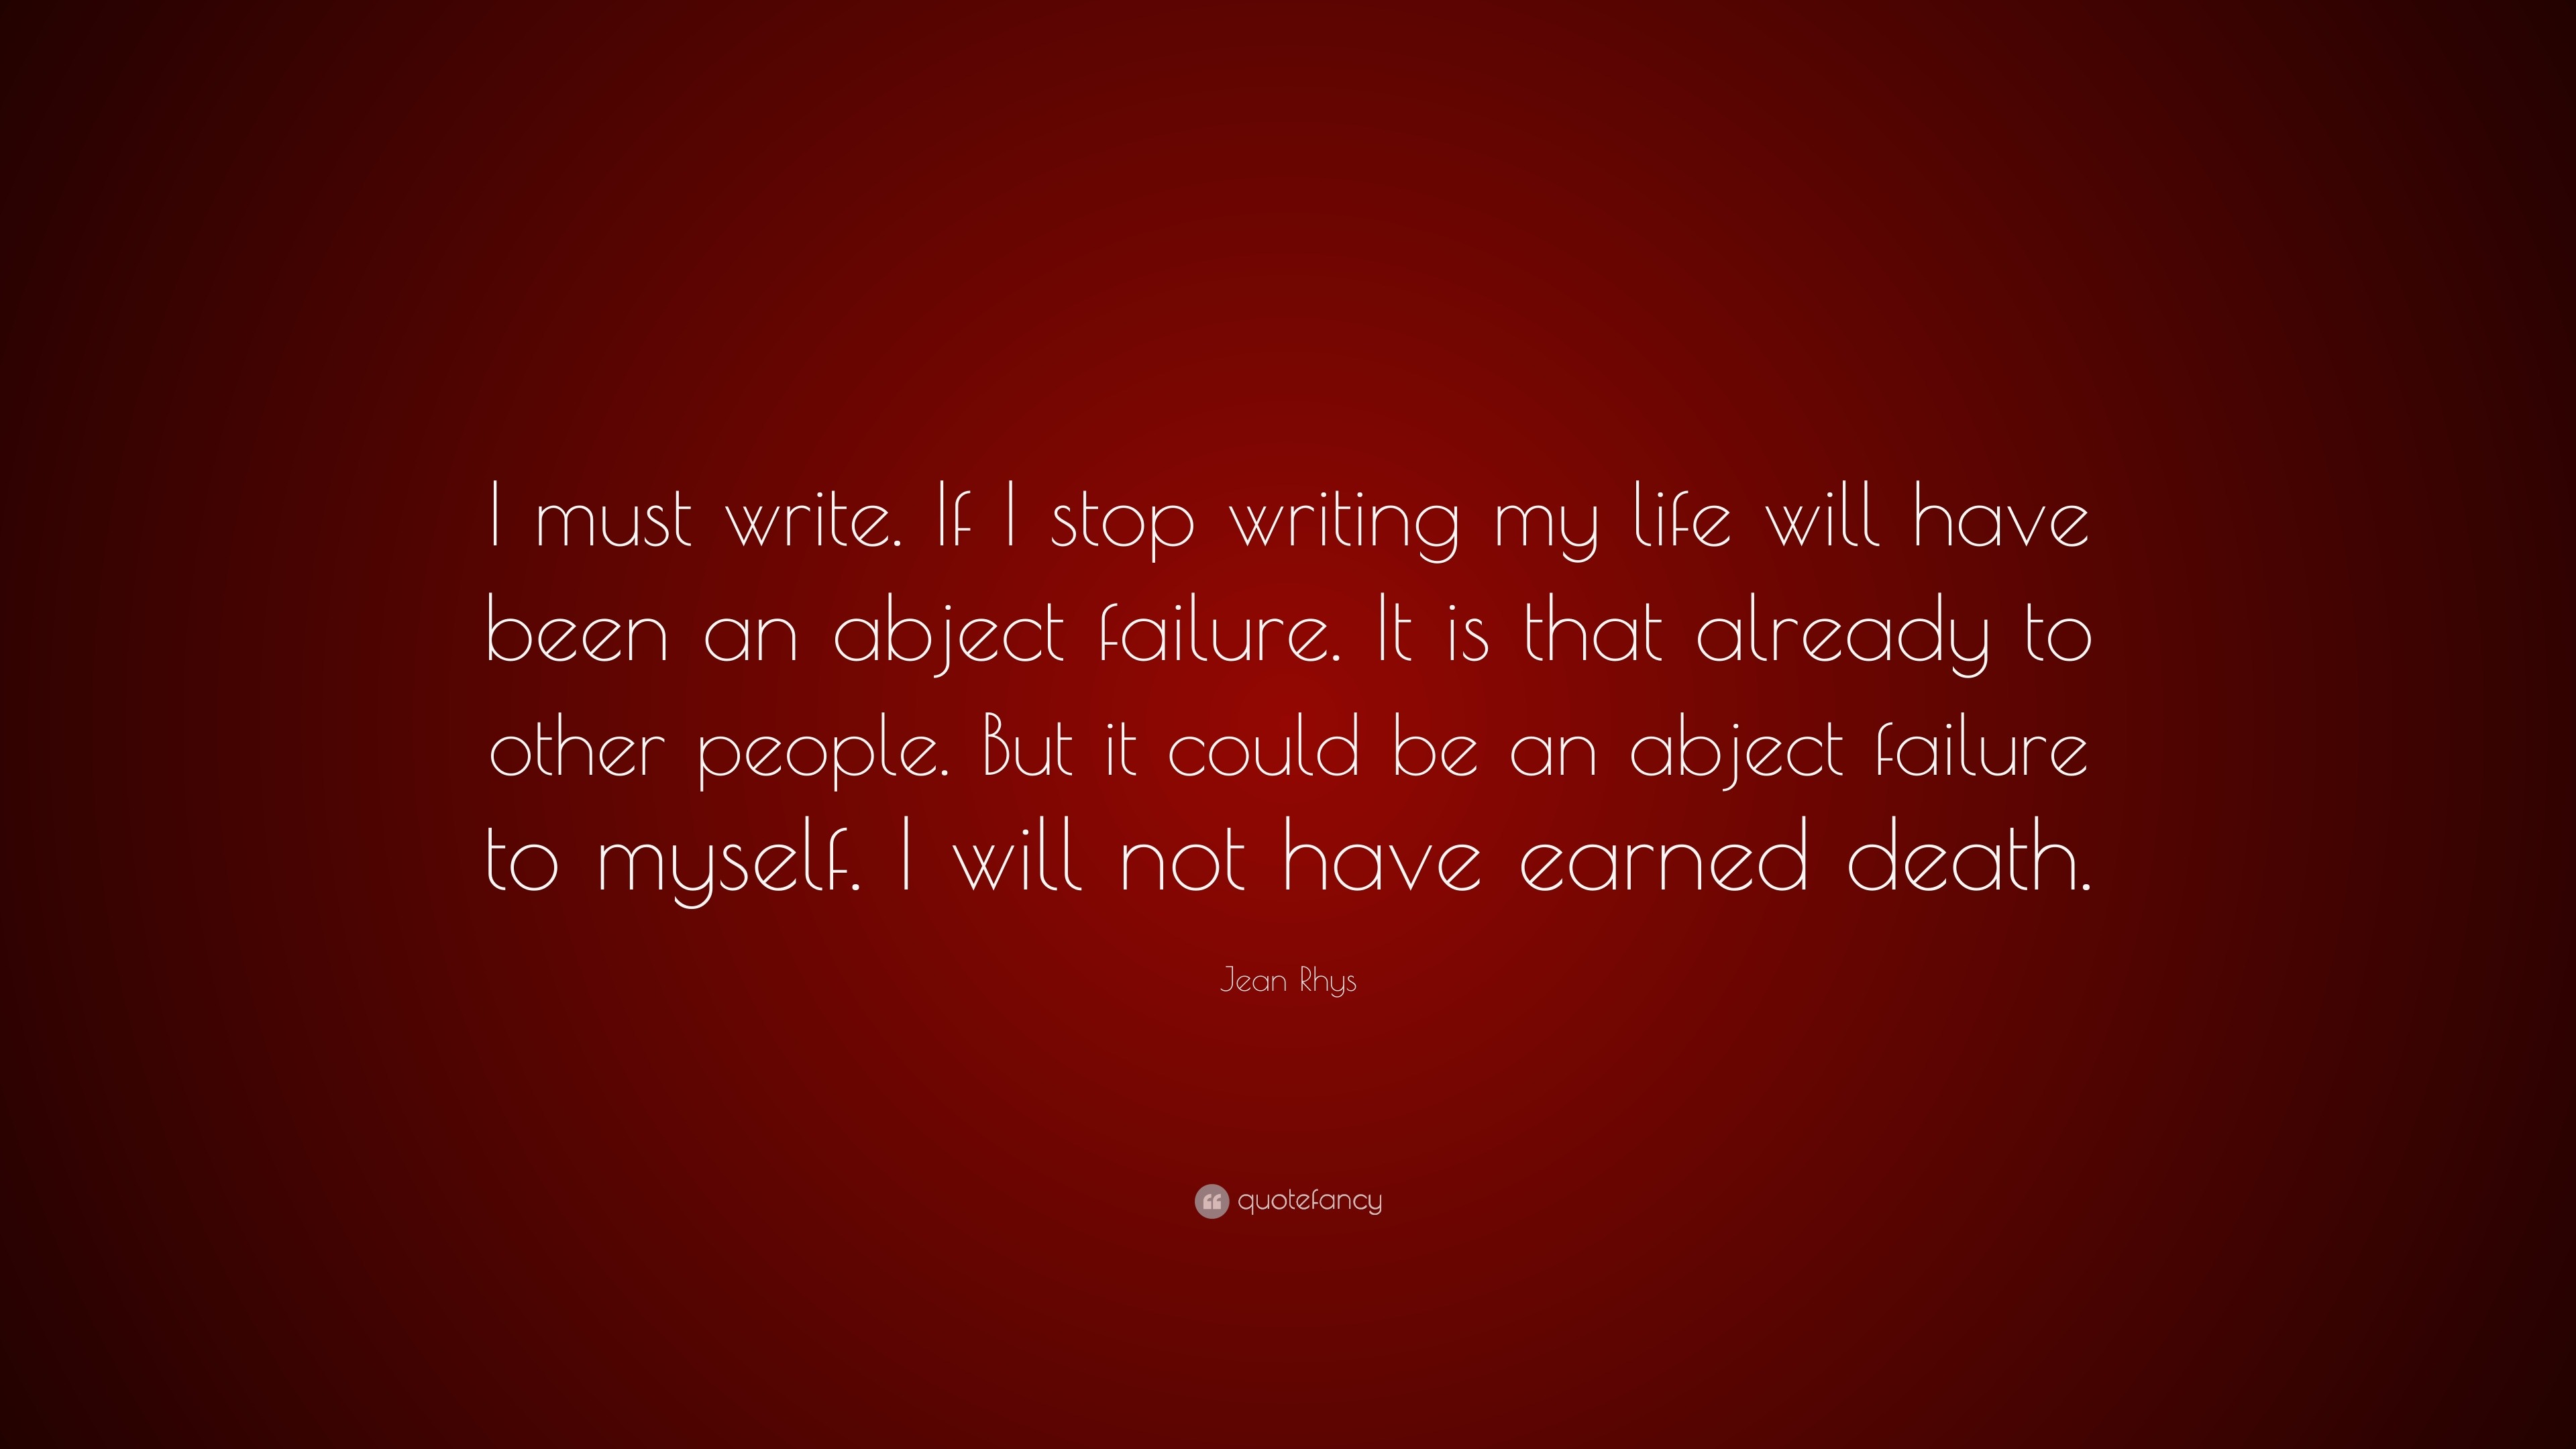 Jean Rhys Quote: “I must write. If I stop writing my life will have ...